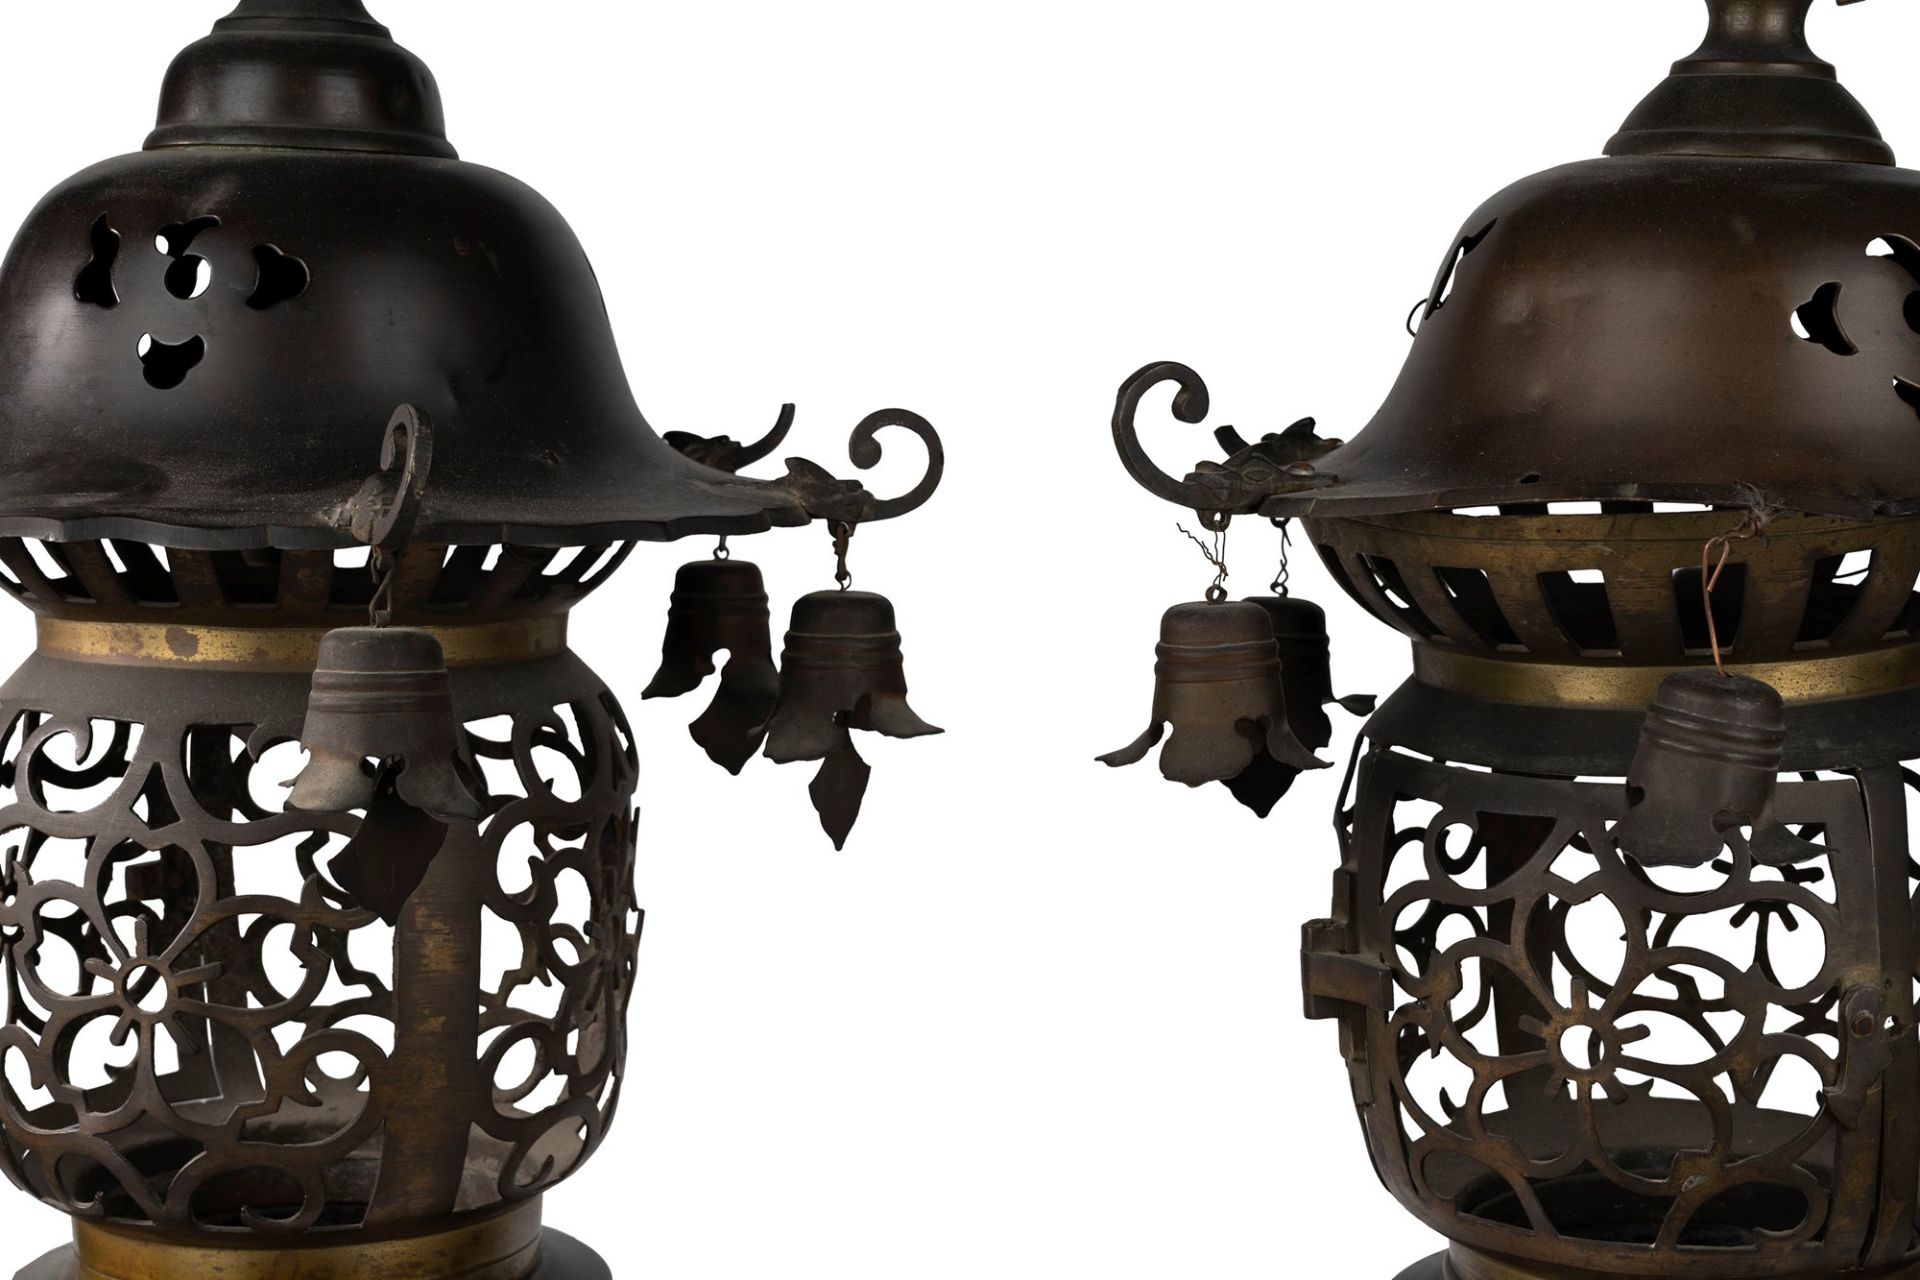 Two metal lamps, China, early 20th century - Image 2 of 3